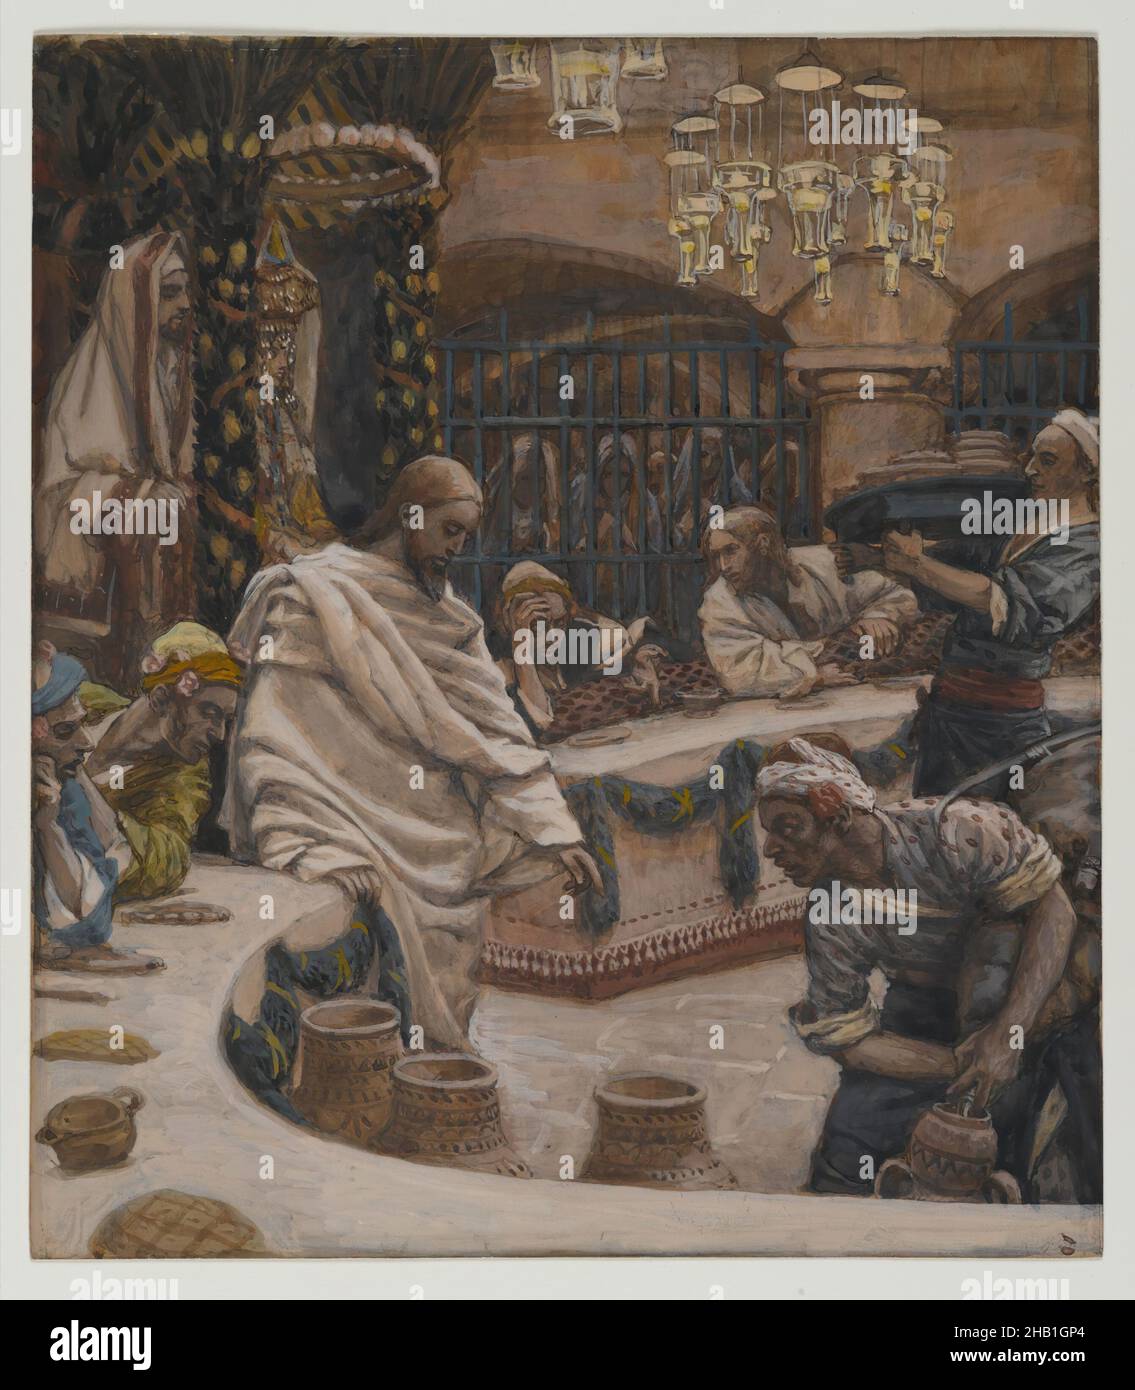 The Marriage at Cana, Les noces de Cana, The Life of Our Lord Jesus Christ, La Vie de Notre-Seigneur Jésus-Christ, James Tissot, French, 1836-1902, Opaque watercolor over graphite on gray wove paper, France, 1886-1894, Image: 8 15/16 x 7 13/16 in., 22.7 x 19.8 cm, Bible, Biblical, catholicism, Christ, Christianity, drapery, French, God, Jesus, John 2:6-11, lamp, marriage, messiah, miracle, New testament, parable, Religion, Religious, Tissot, urn, water, wine Stock Photo